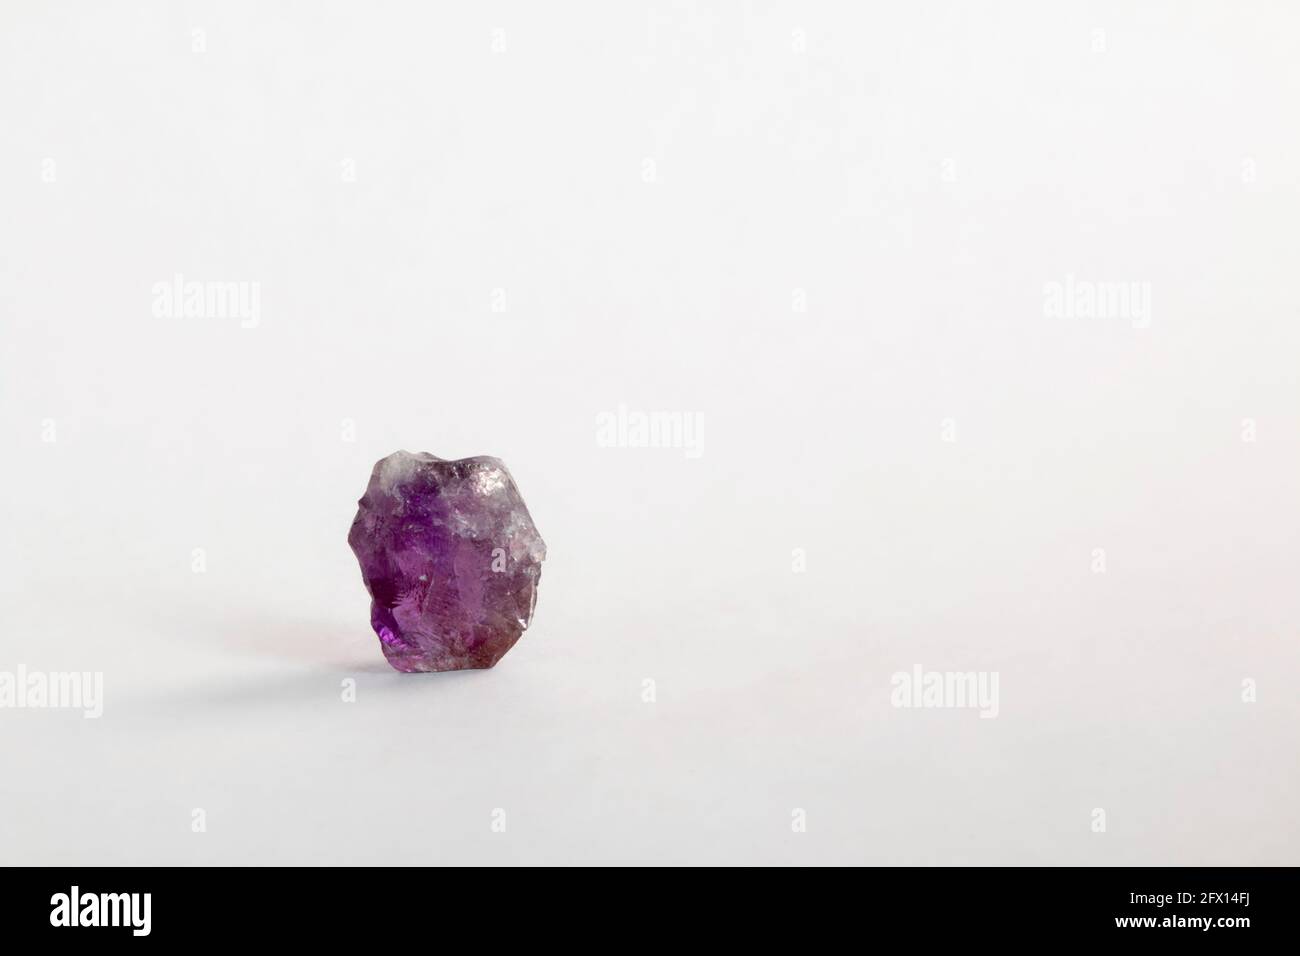 Speicimen of the mineral Amethyst on a white background Stock Photo - Alamy